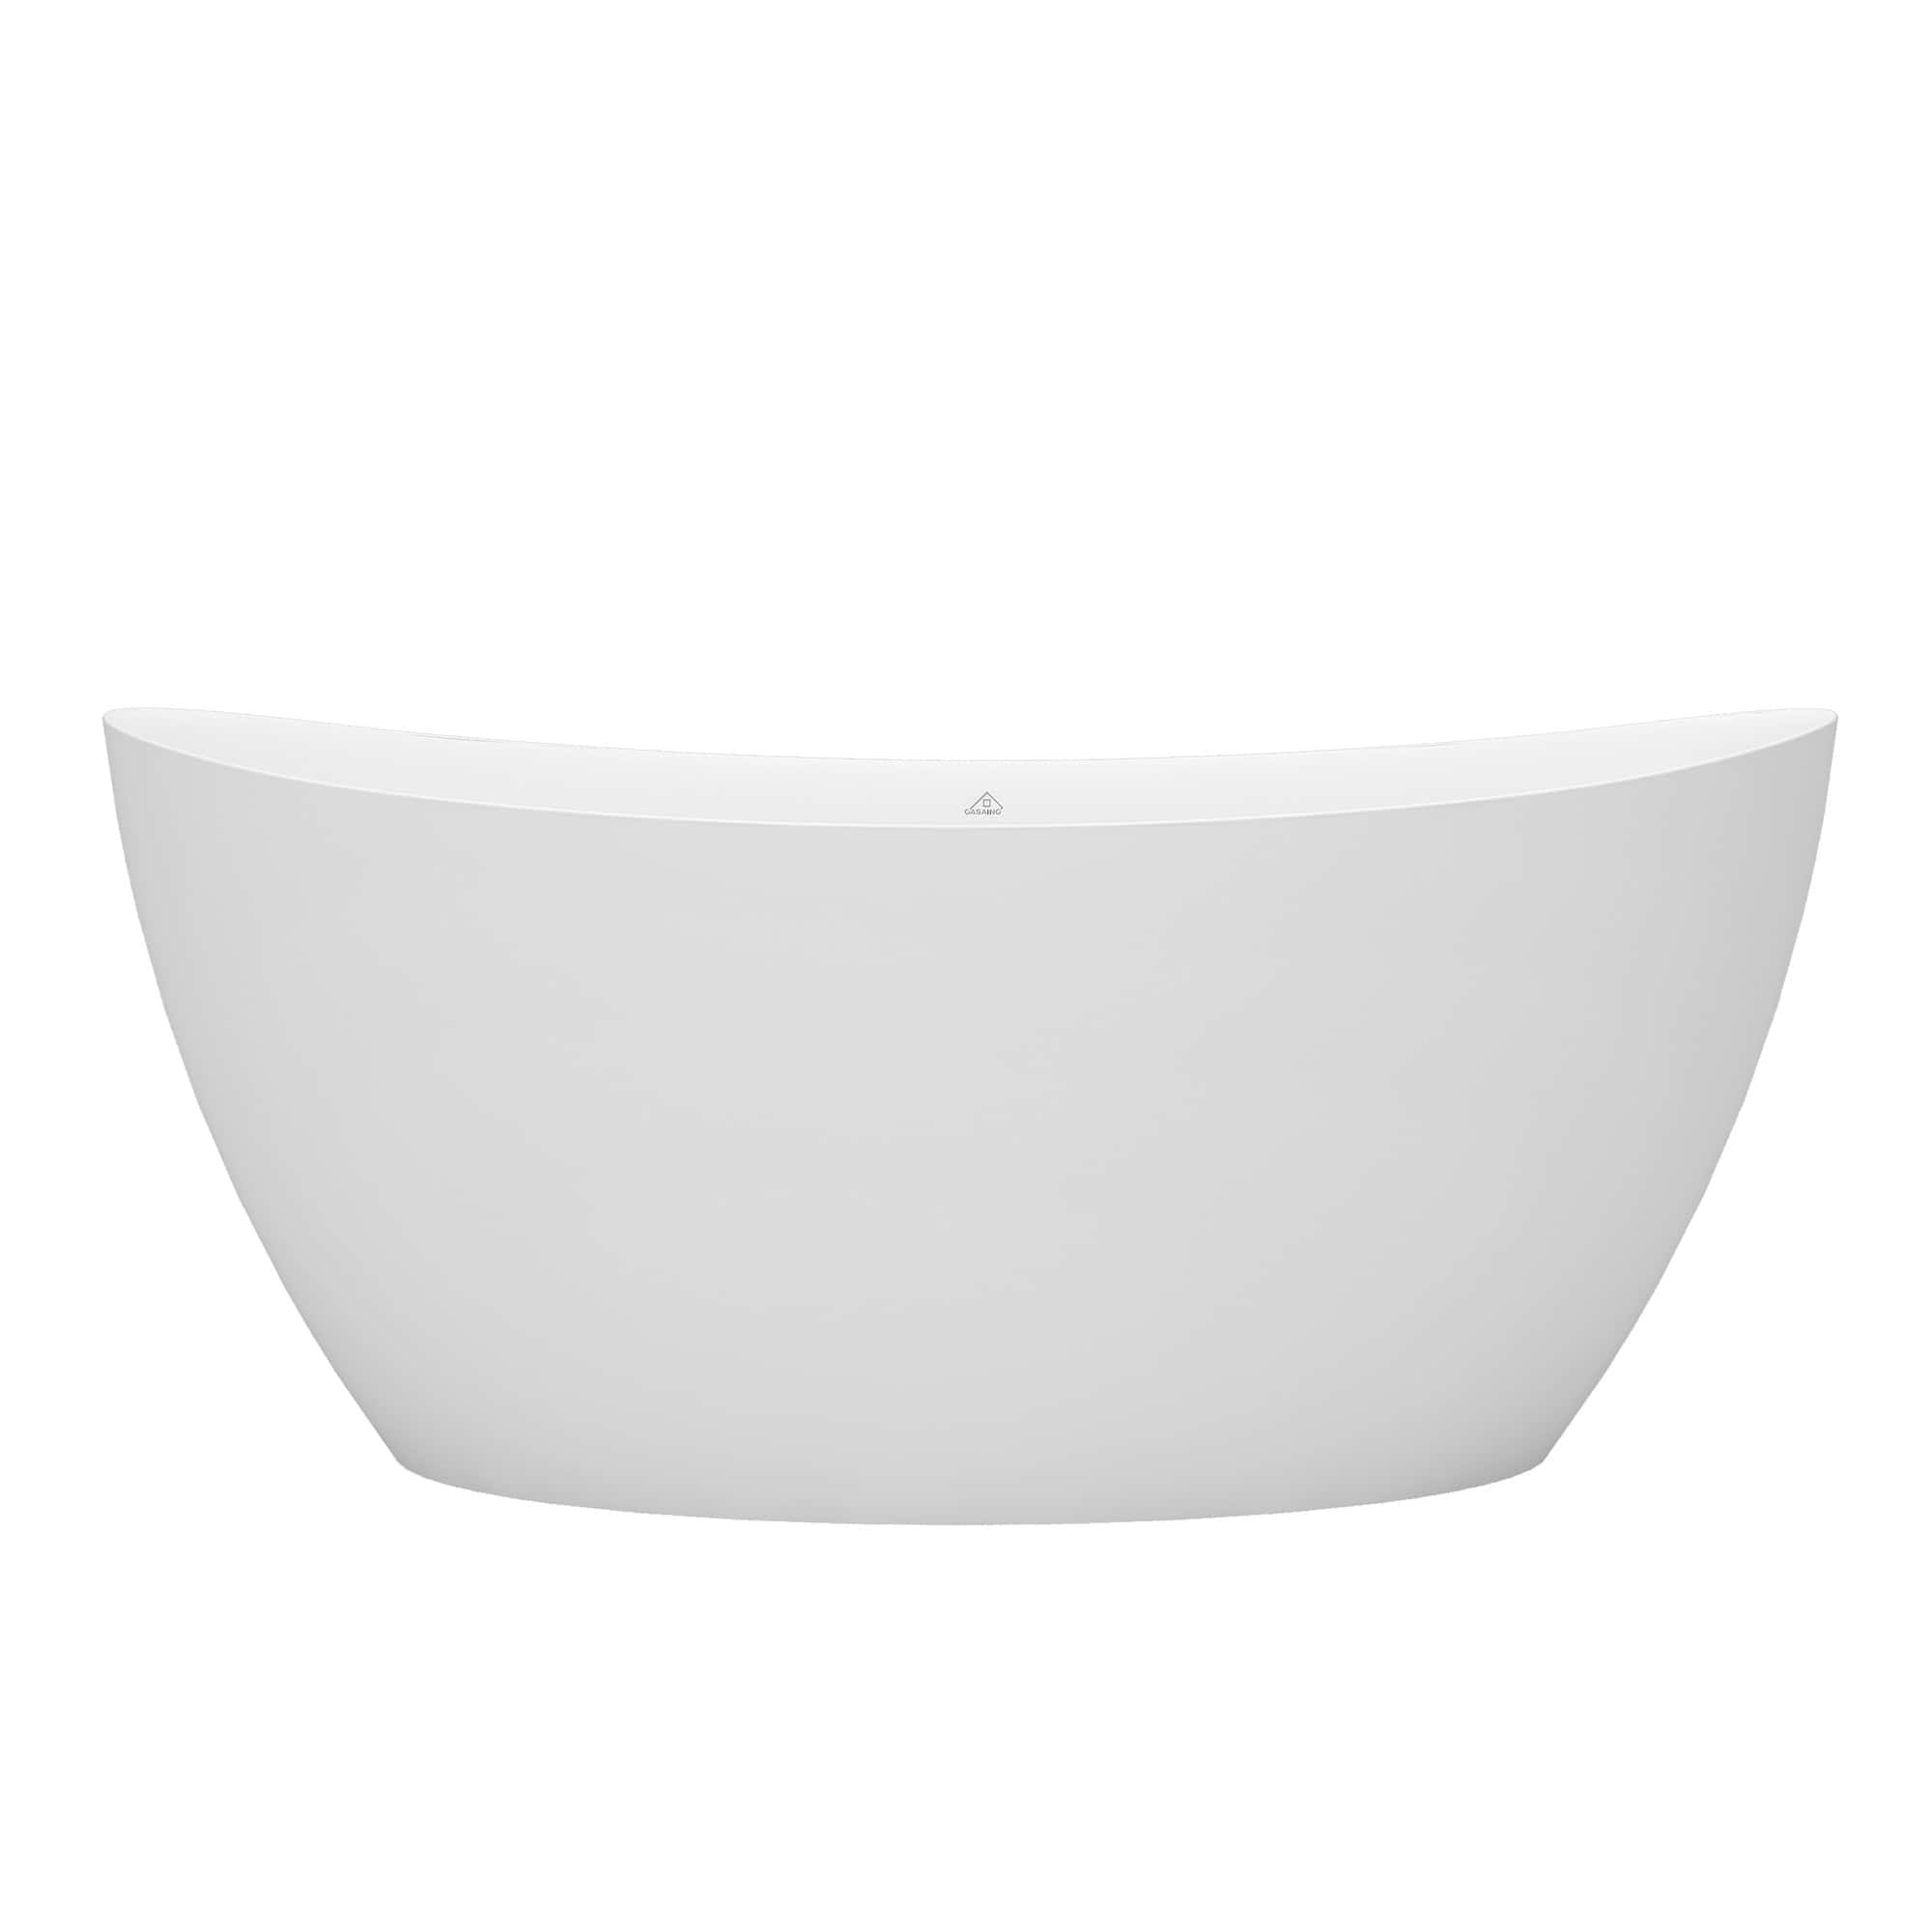 CASAINC 59 Inch Matte White Independent Double-headed Raised Solid Sur